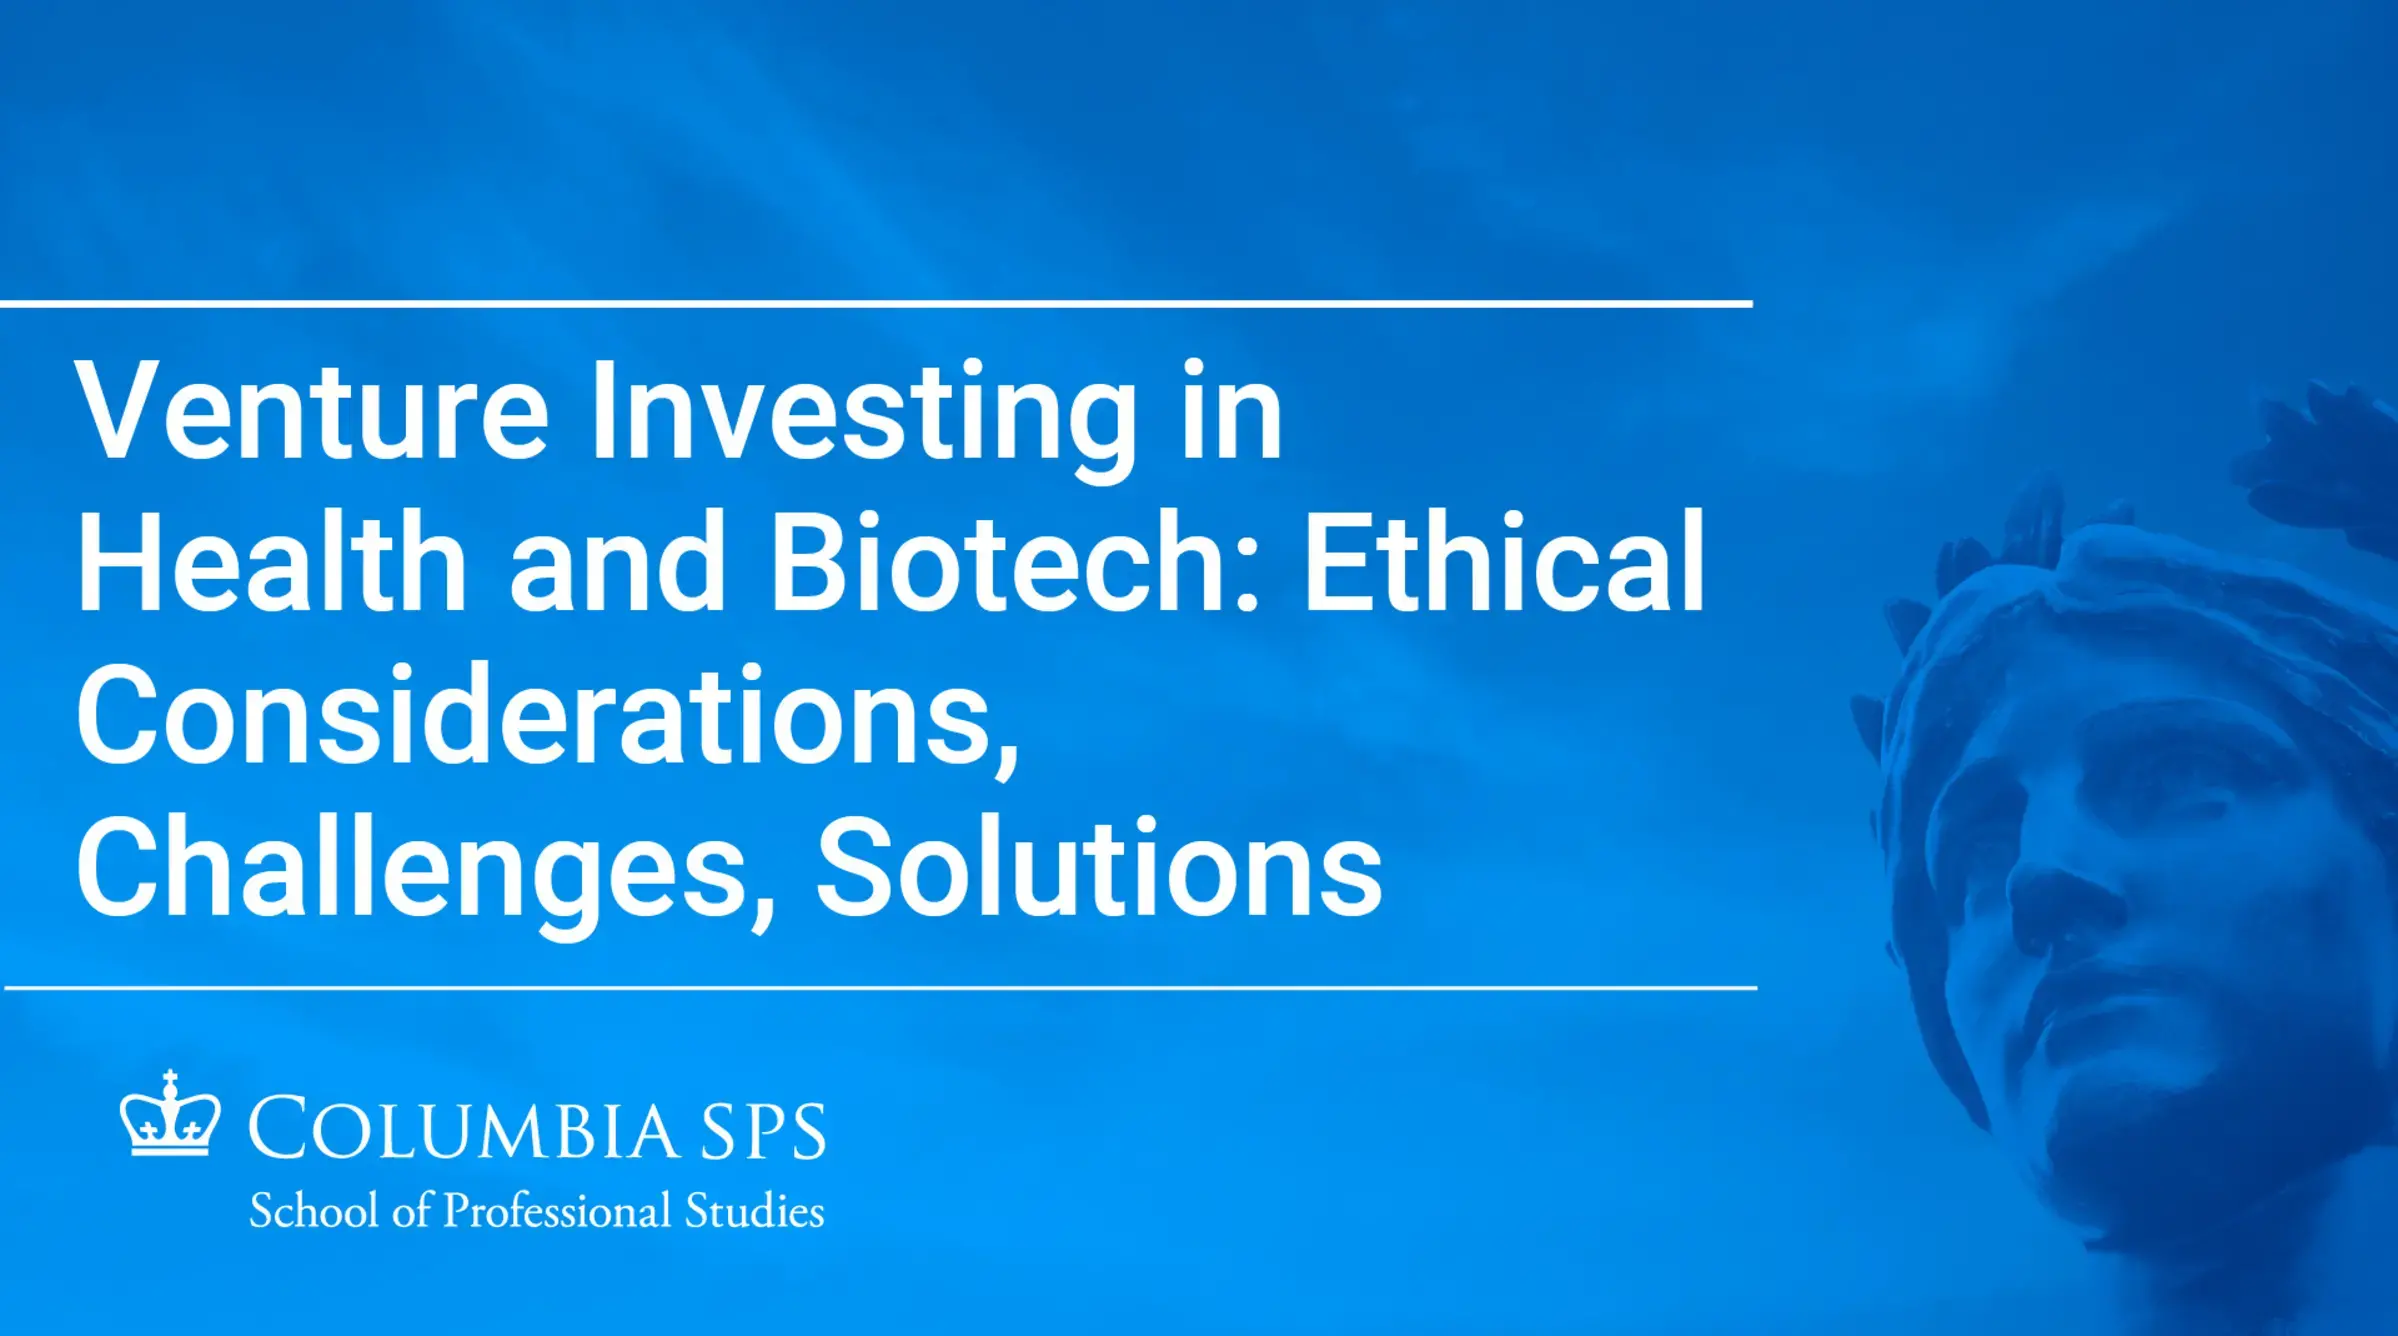 Click to play video: Venture Investing in Health and Biotech: Ethical Considerations, Challenges, Solutions